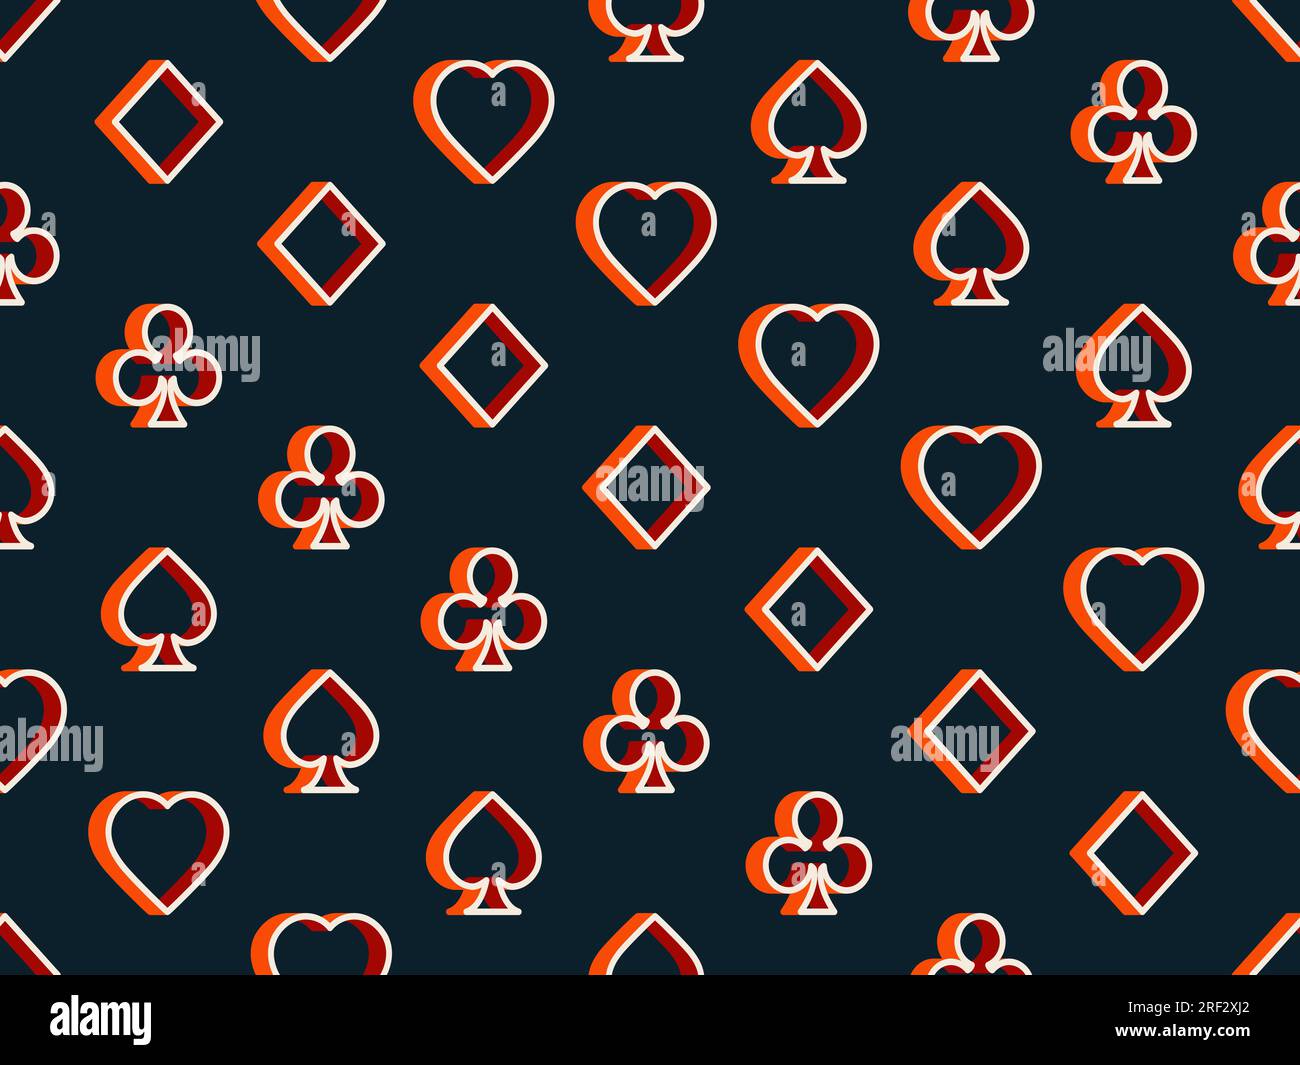 Seamless pattern with card suits: diamonds, hearts, clubs, spades in 3d ...